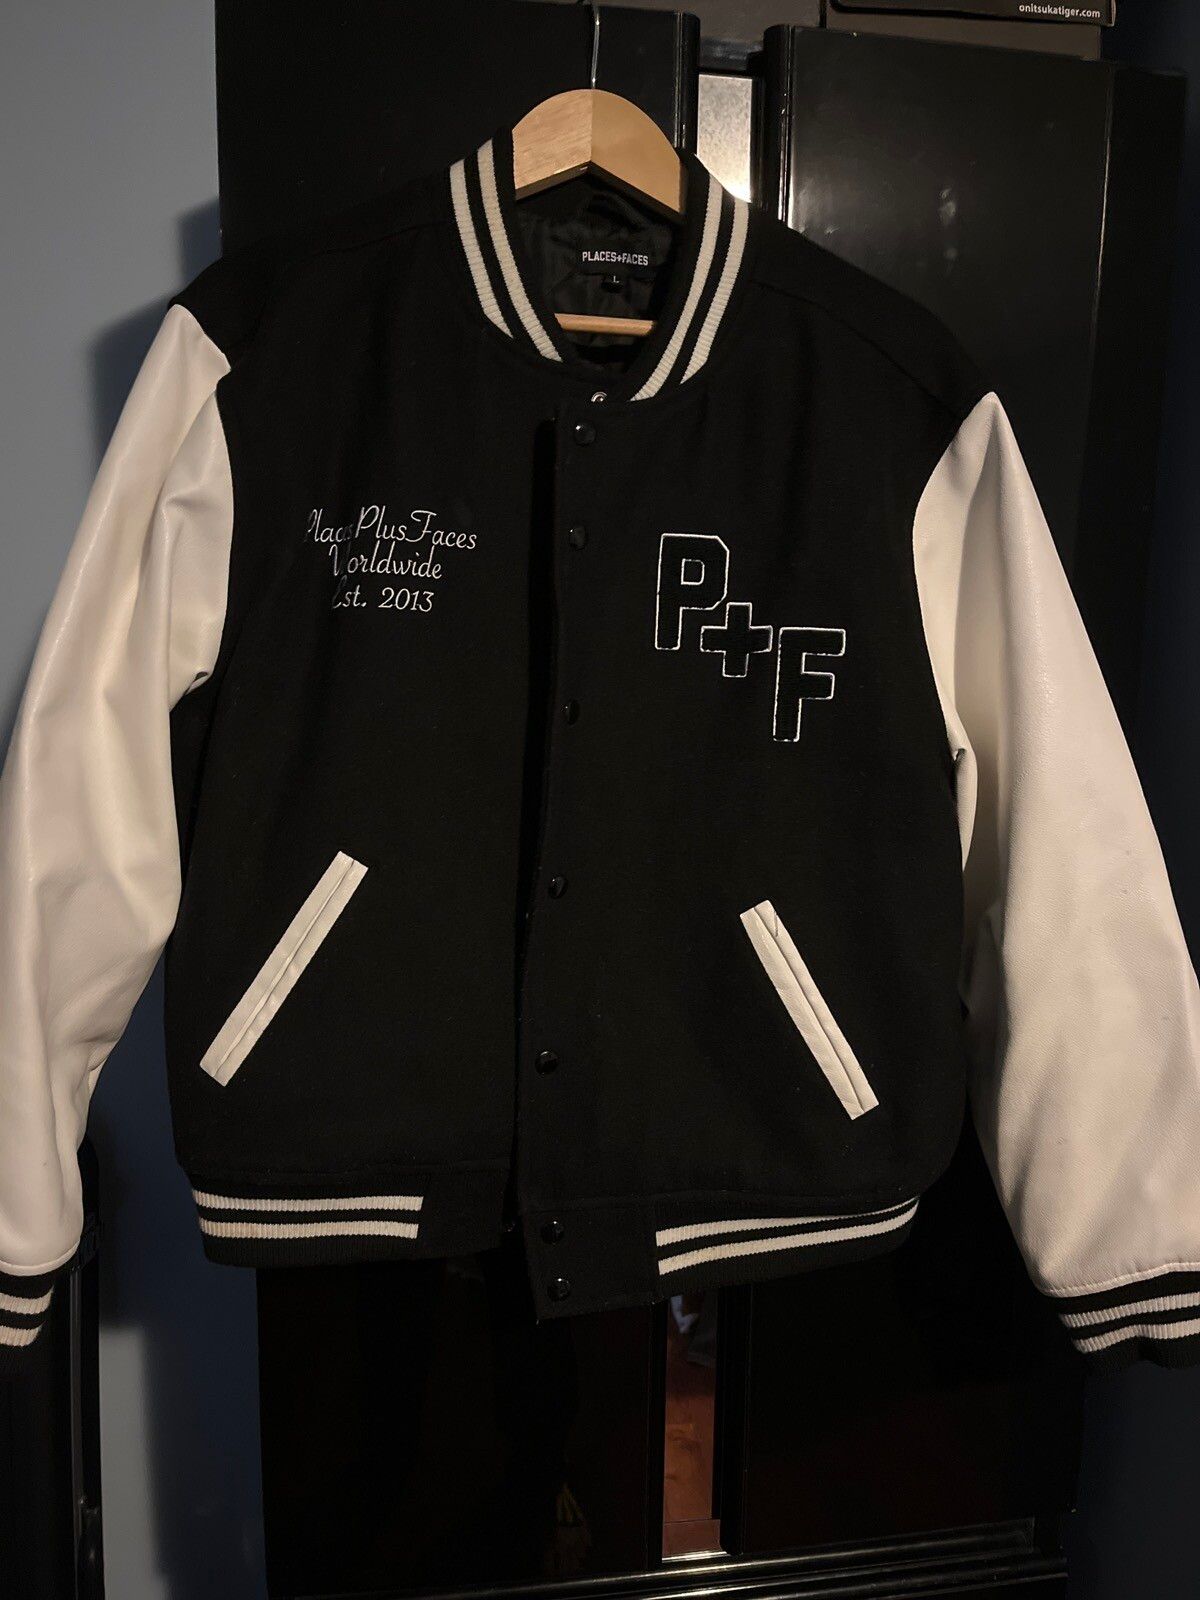 Places Faces Places + Faces OG A$Ap Rocky Varsity in Null, Men's (Size Large) Product Image